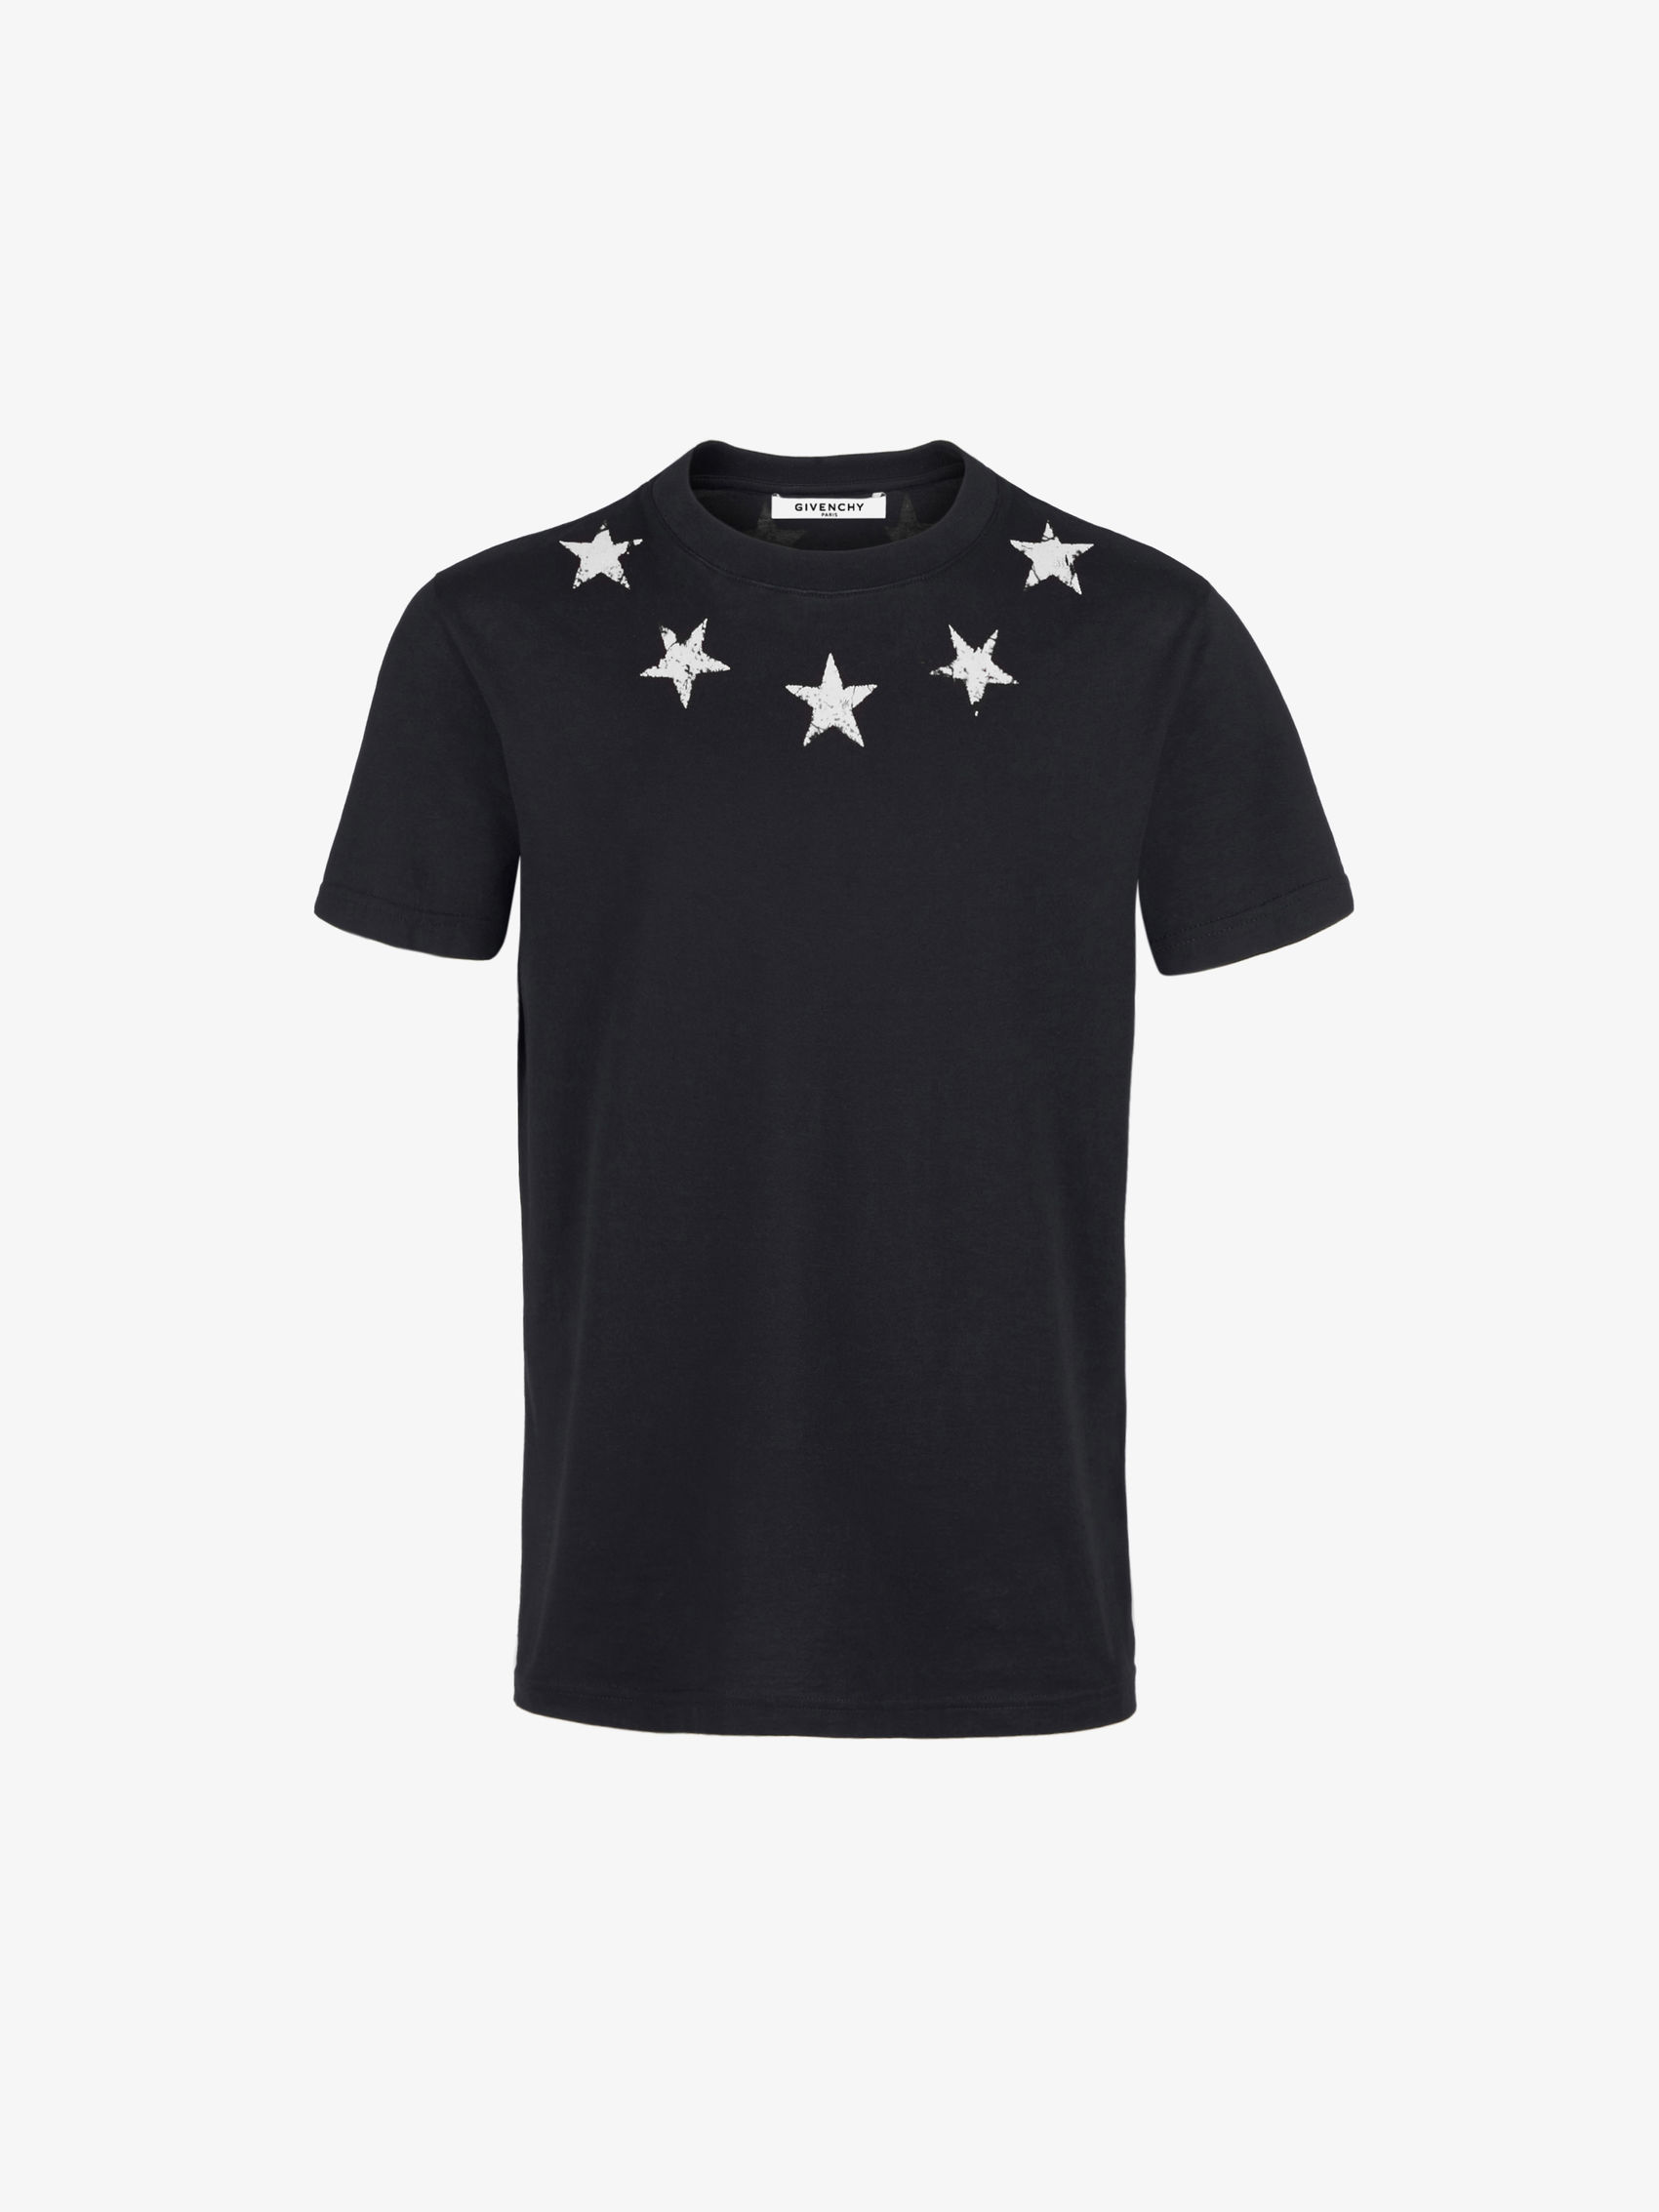 Givenchy Black/White Cracked Star T-Shirt - Rogue